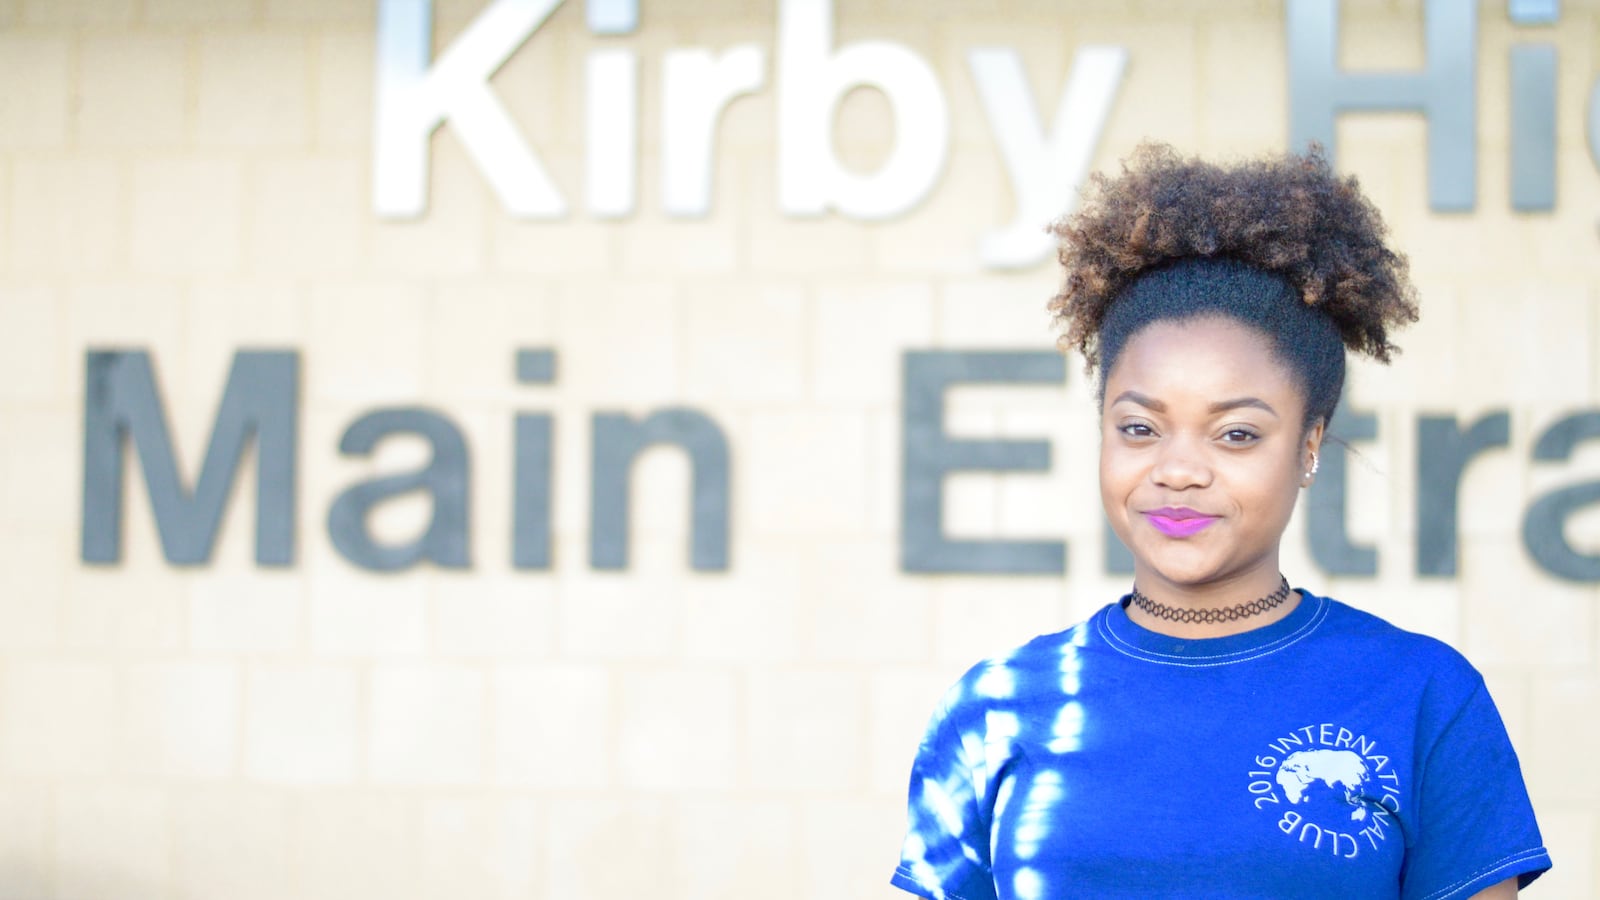 Kirby High School senior Kimberly London hopes to attend the University of Memphis with financial aid. She recently completed her FAFSA form during the city's second annual FAFSA drive.